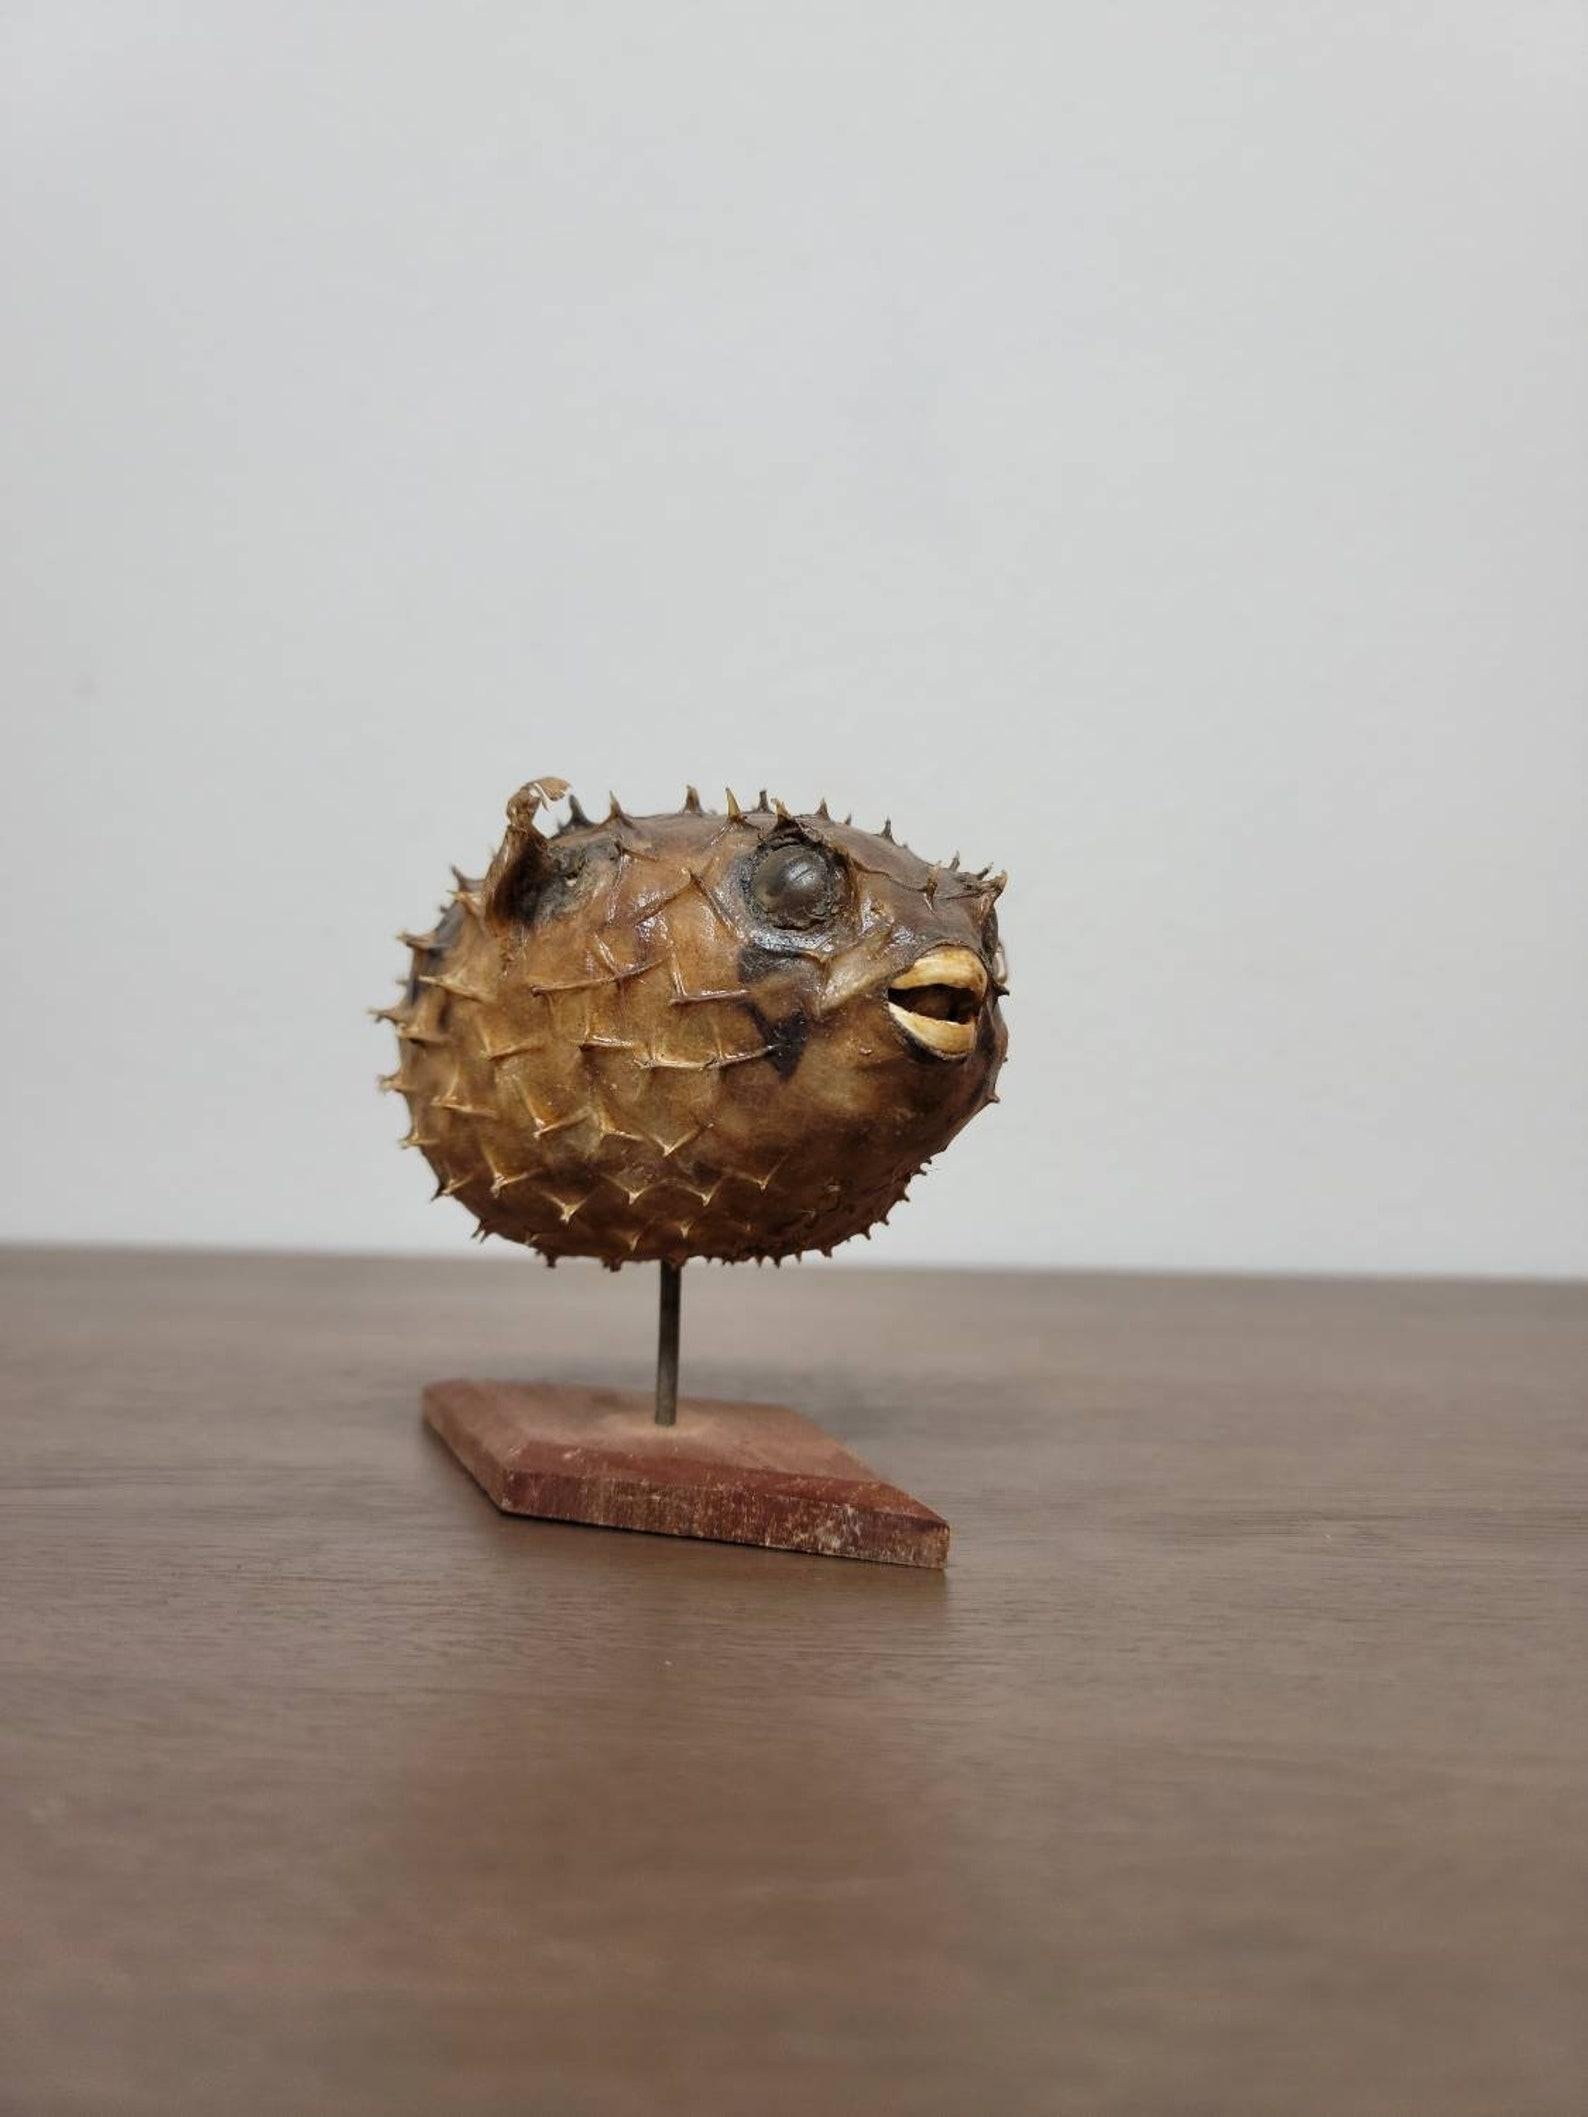 A rare and unusual antique marine natural taxidermy specimen of a Porcupinefish. Belonging to the Diodontidae family, Tetraodontiformes order, commonly referred to as blowfish, and closely related to the adorable inflating puffer fish, but with a